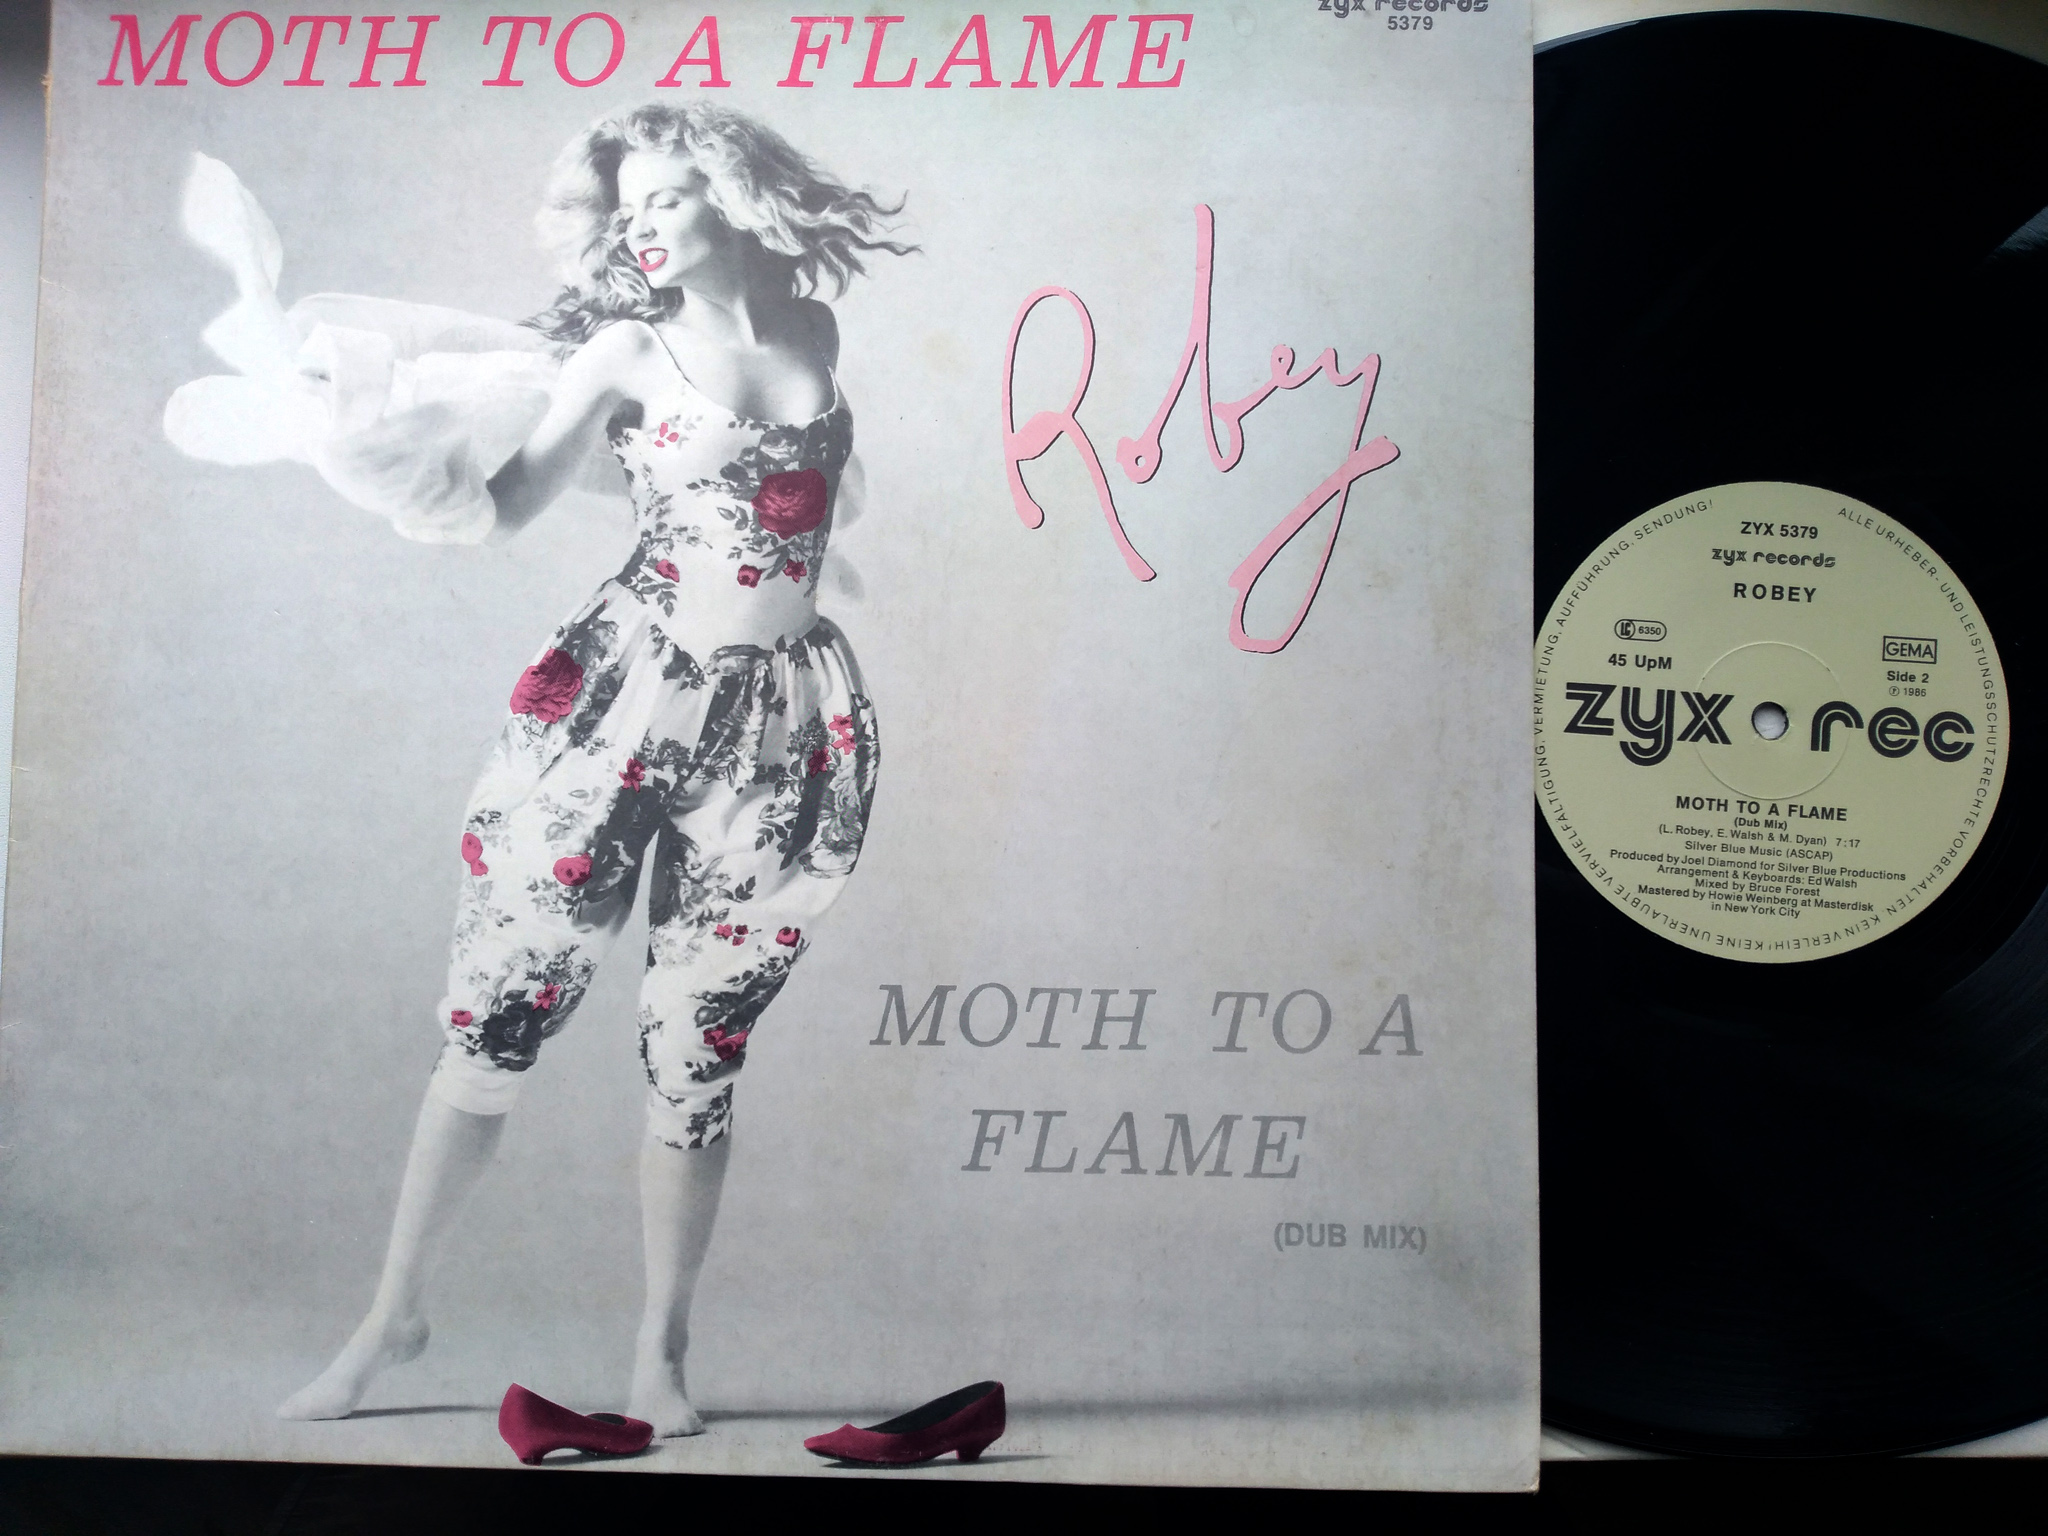 Robey - Moth To Flame